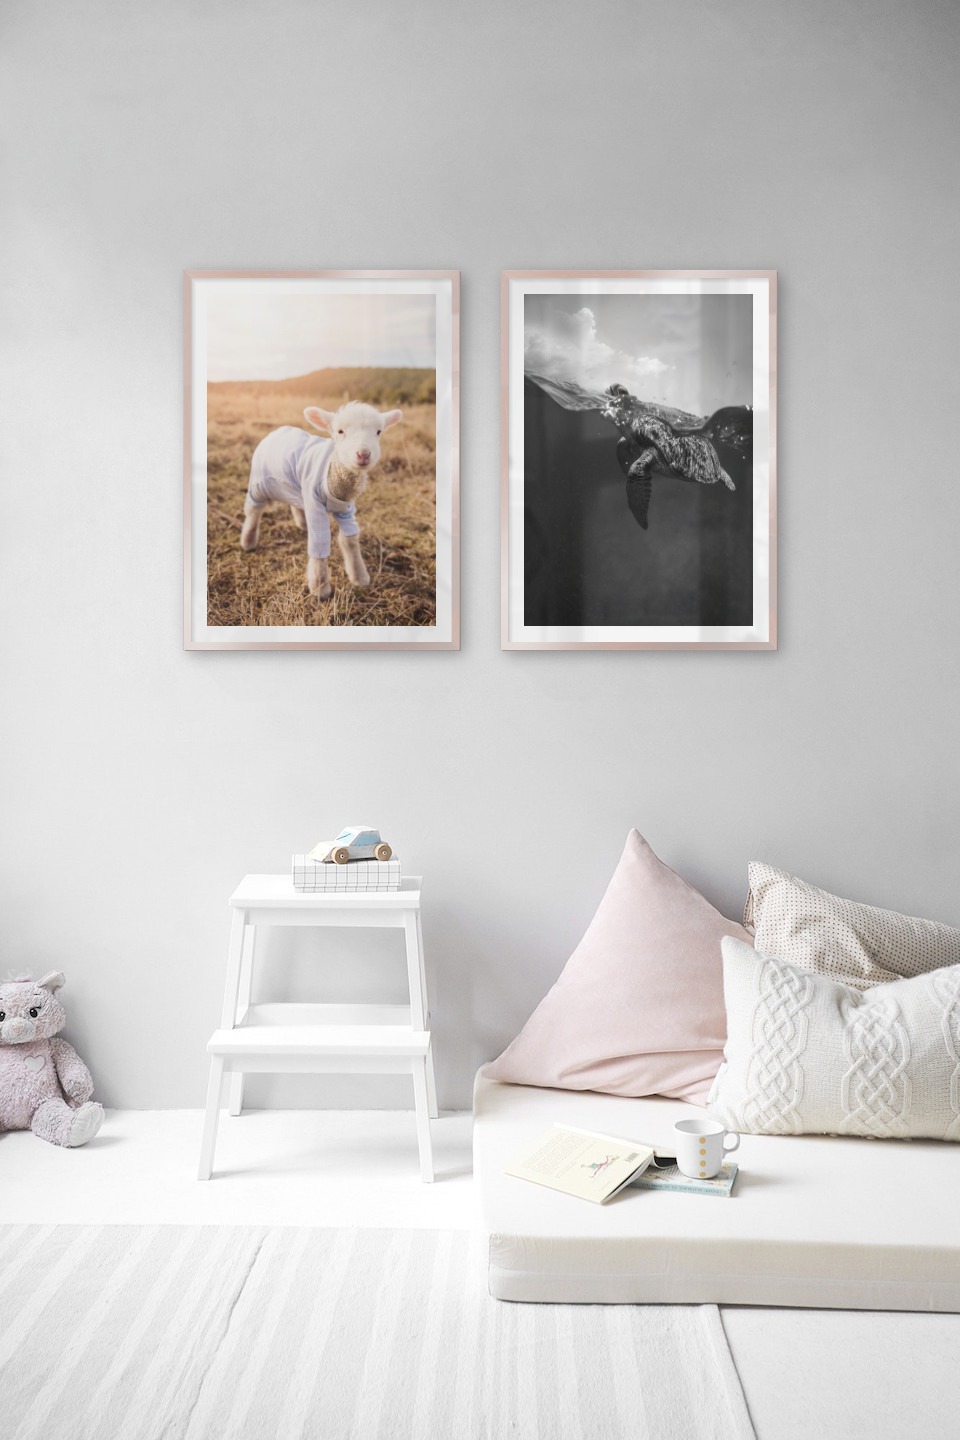 Gallery wall with picture frames in copper in sizes 50x70 with prints "Lamb" and "Turtle"